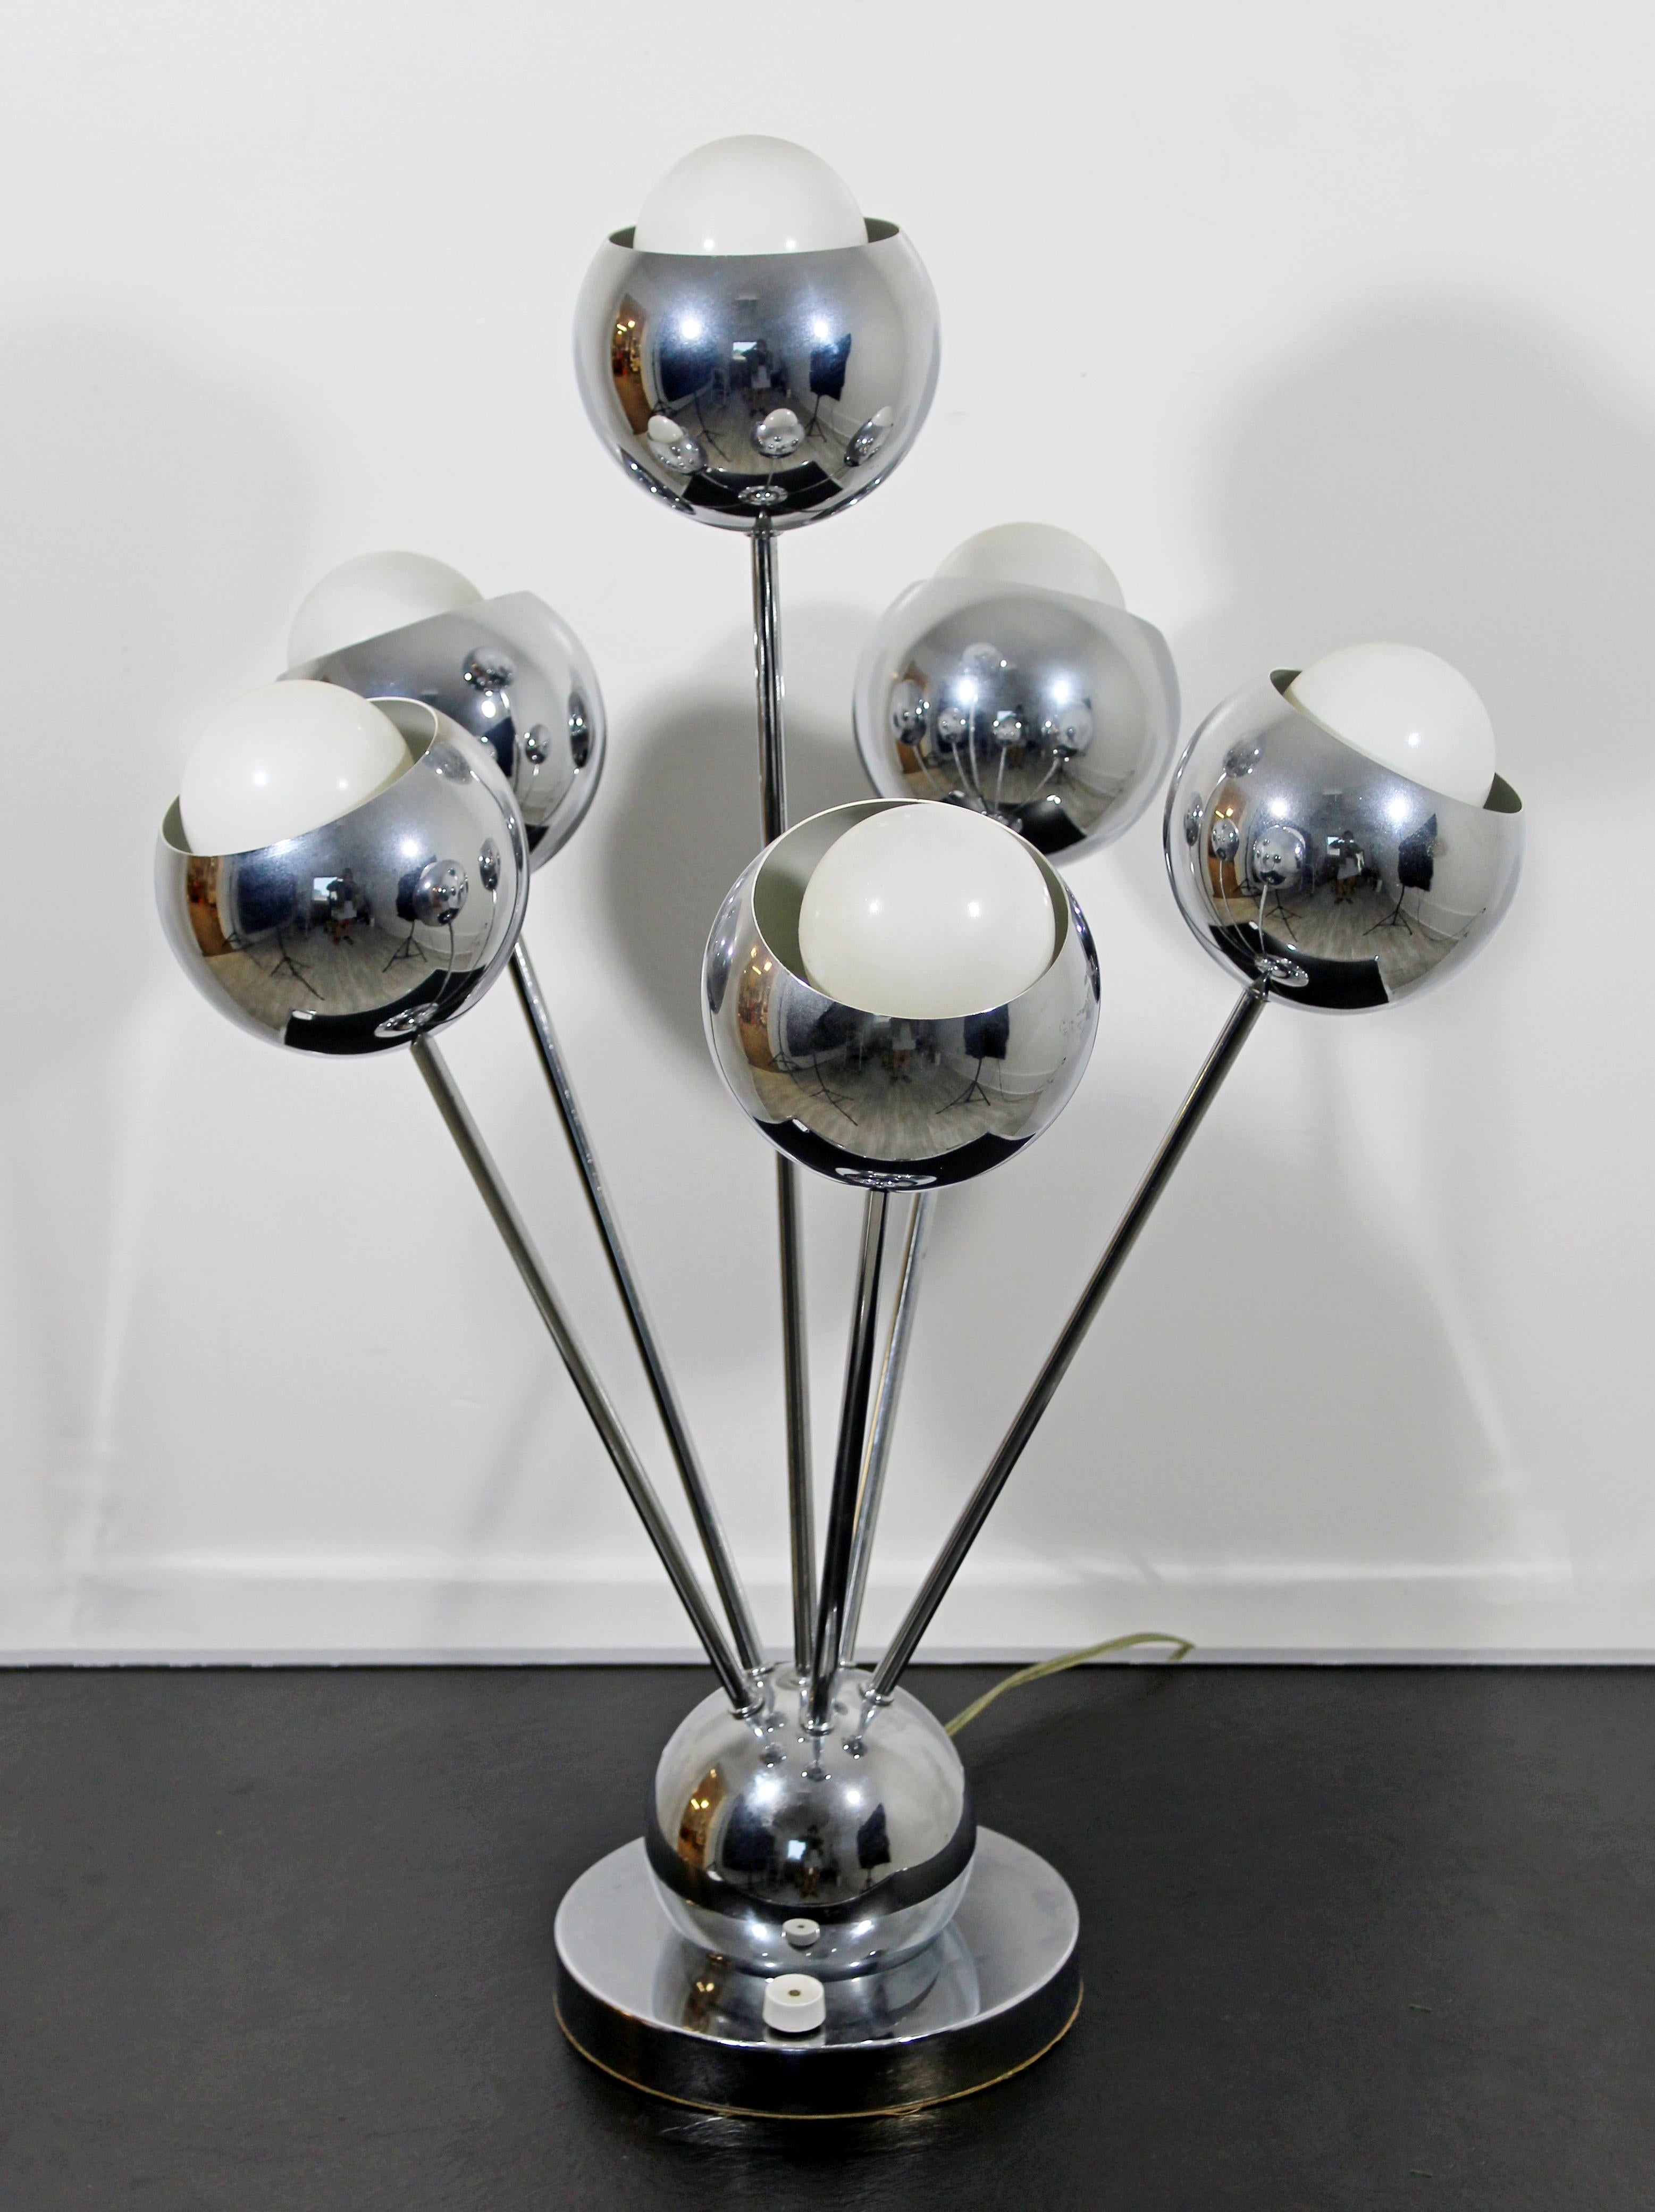 For your consideration is a stunning, Sputnik style six-arm, chrome table lamp, by Robert Sonneman, circa 1970s. In very good condition. The dimensions are 18